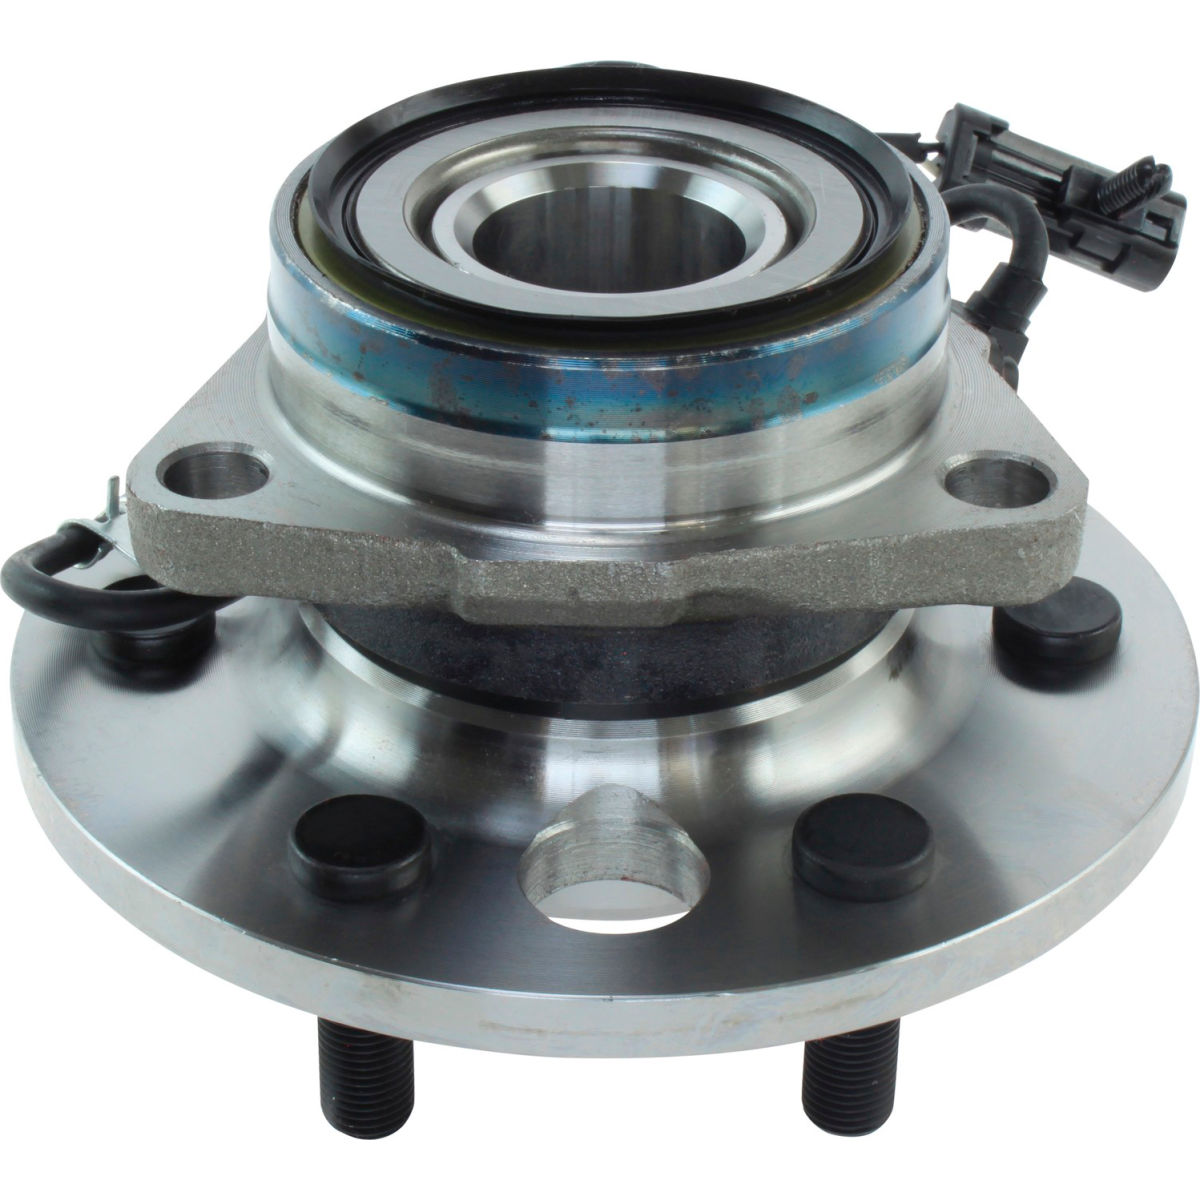 Centric B2643820 402.66004E C-Tek Standard Hub & Bearing Assembly with Integral ABS for 1999-2000 Cadillac Escalade -  World Centric